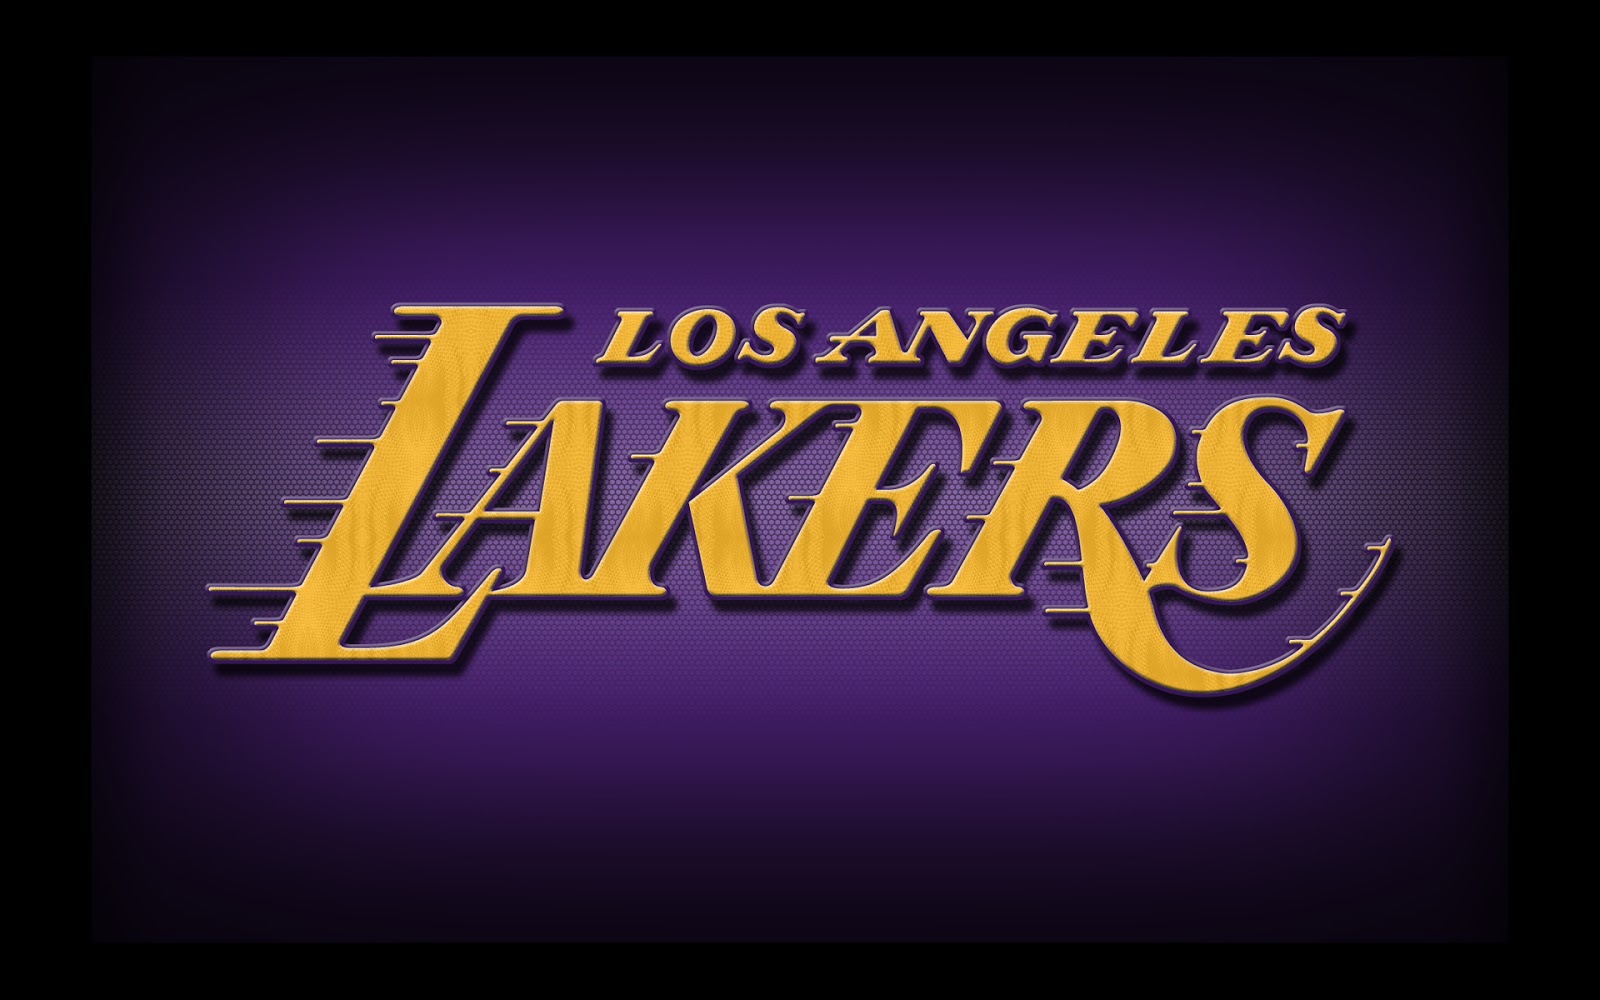  All About Basketball La Lakers Basketball Club Logos Wallpapers 2013